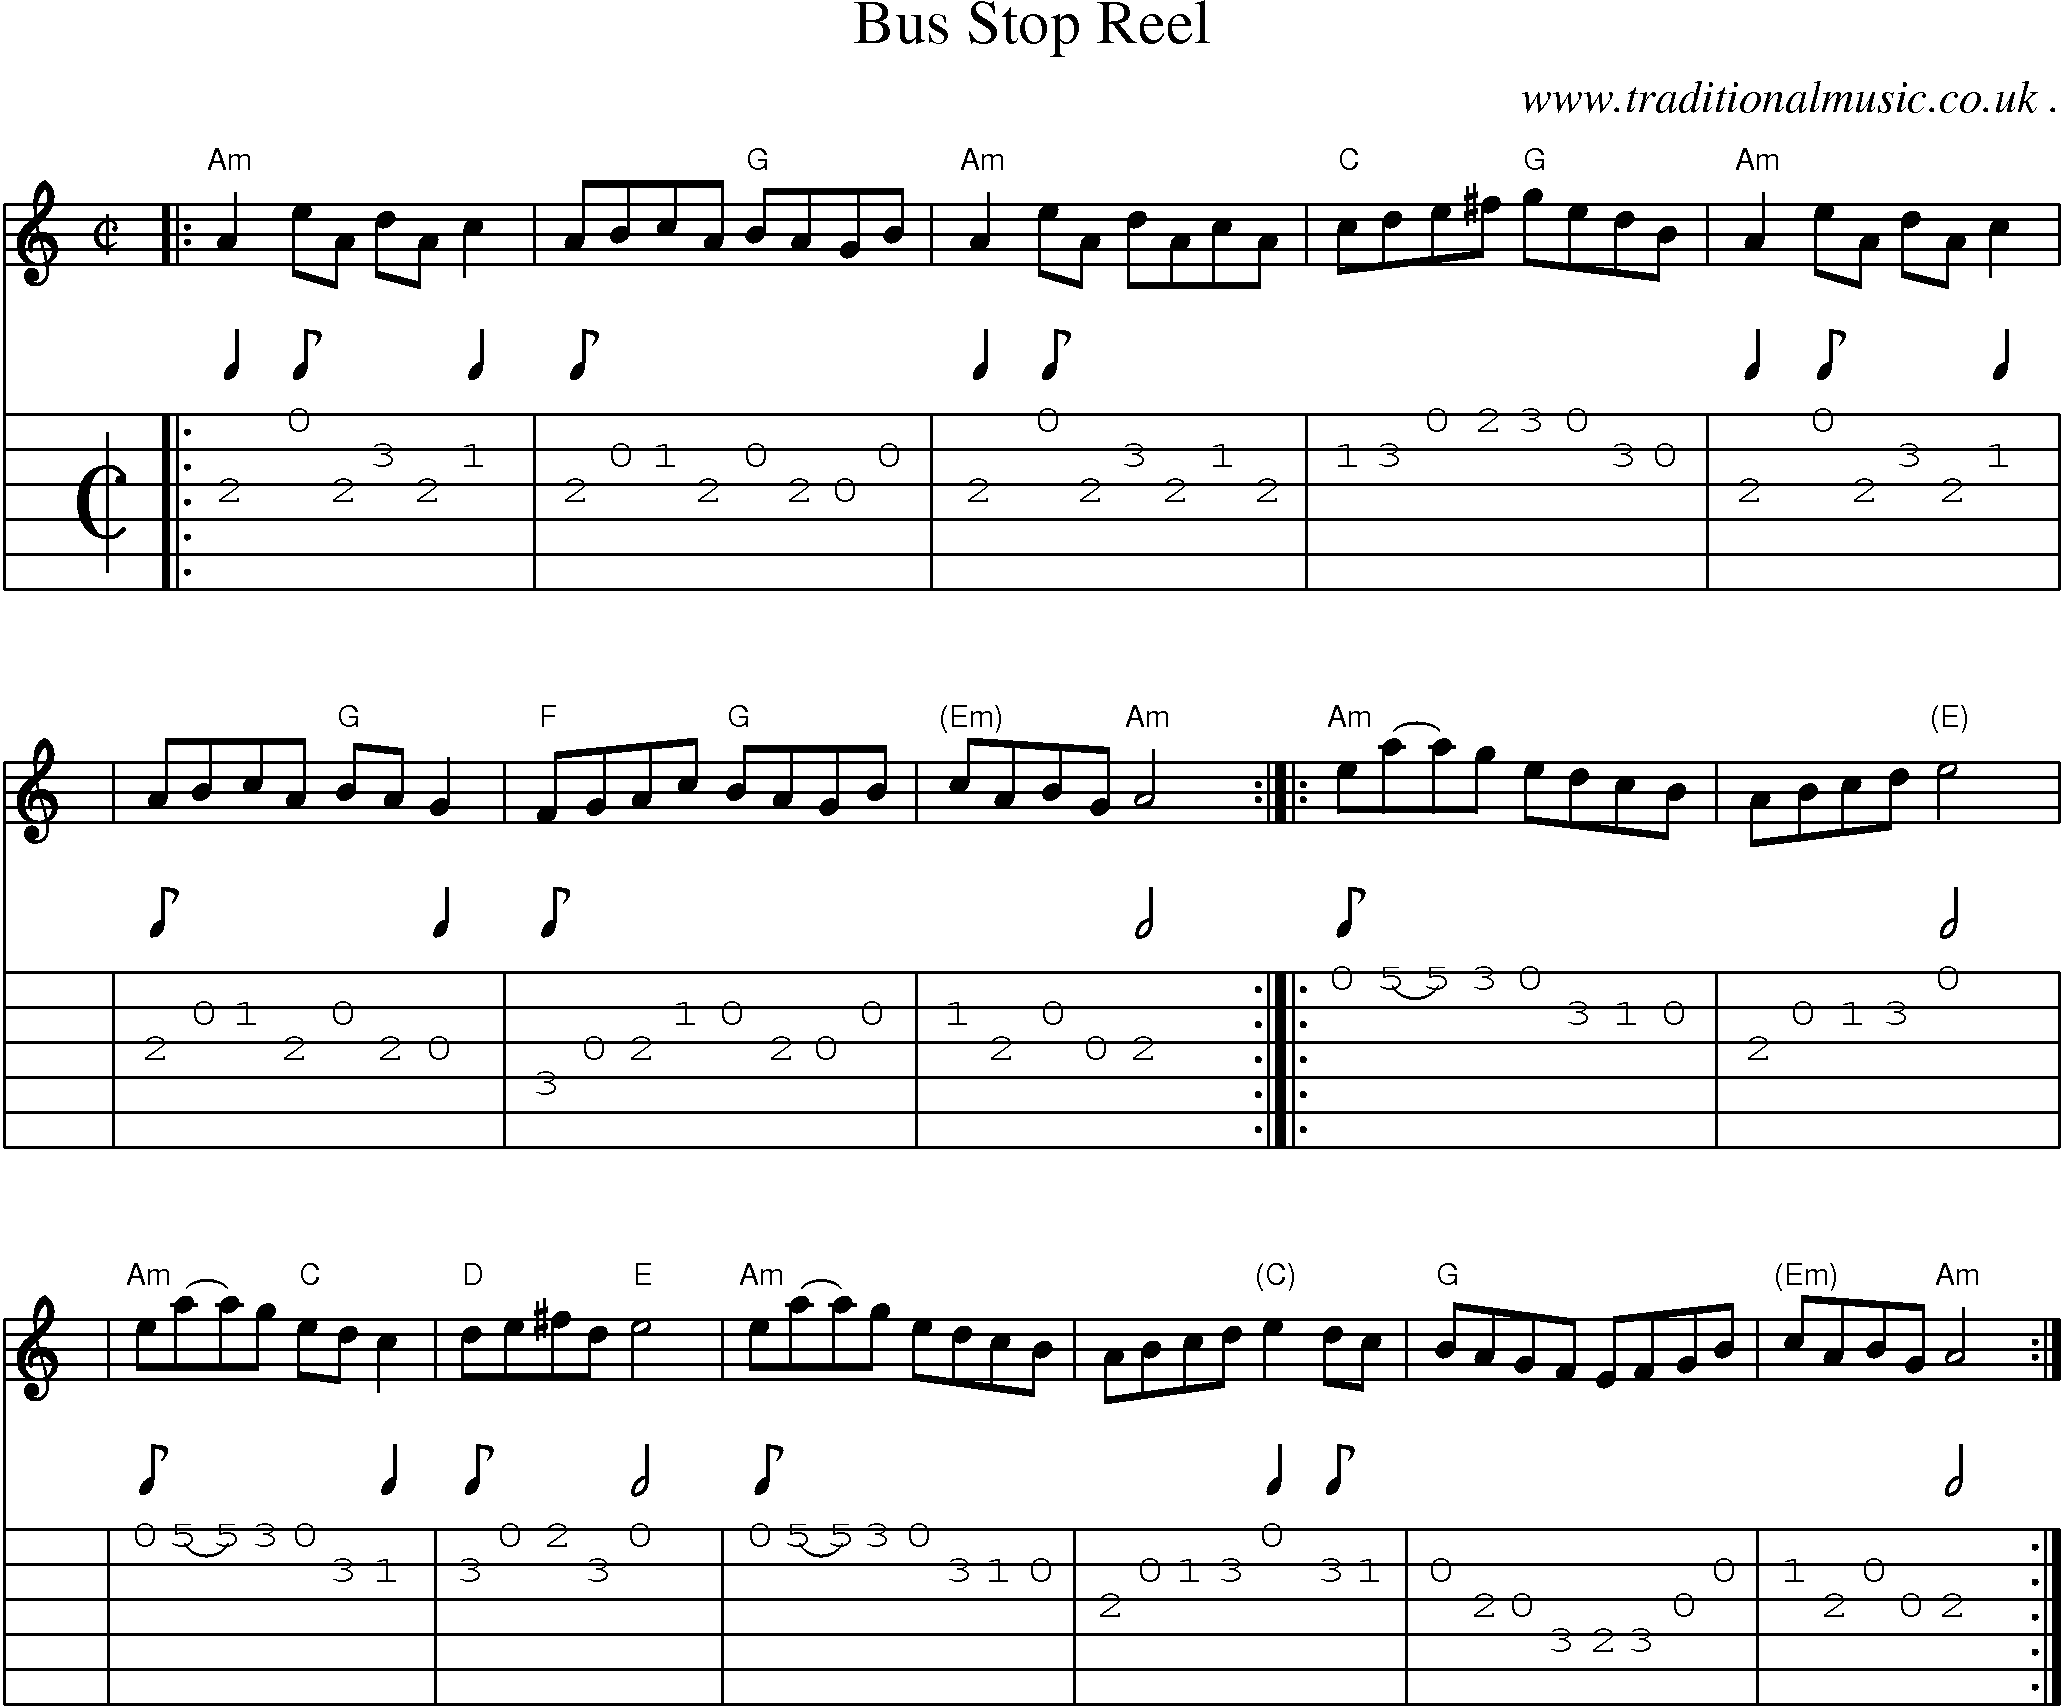 Sheet-music  score, Chords and Guitar Tabs for Bus Stop Reel